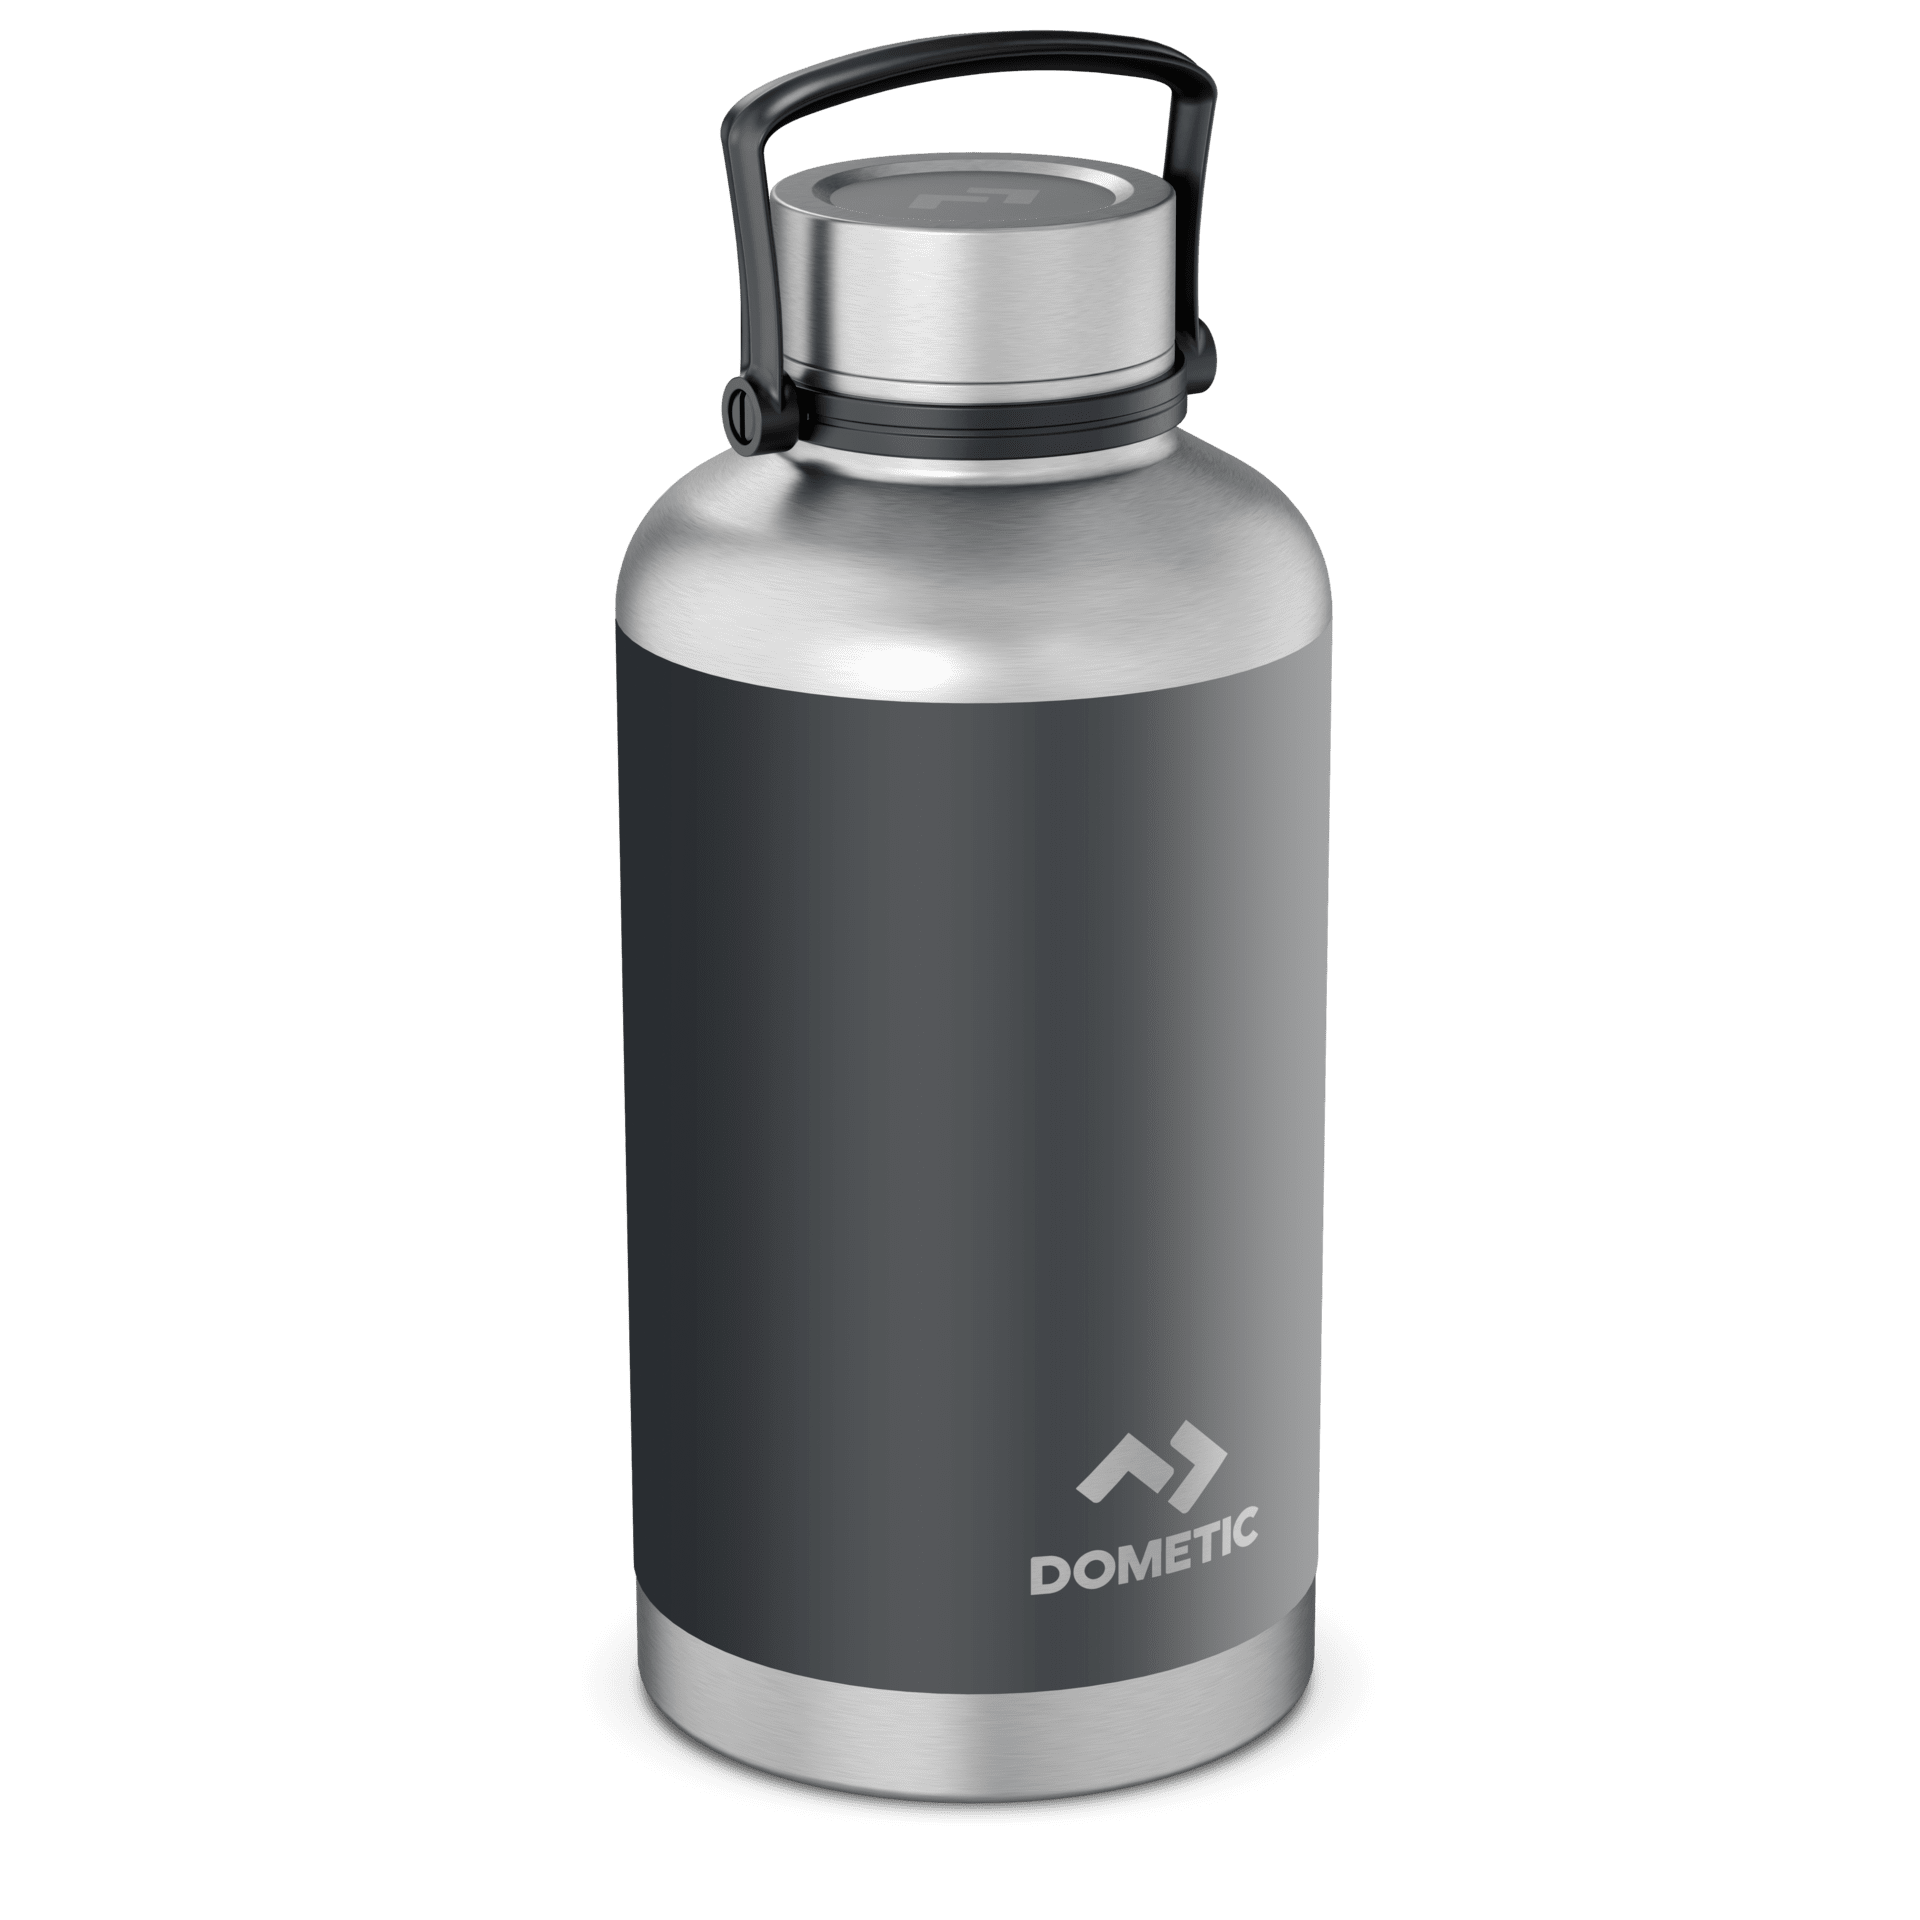 https://www.dometic.com/externalassets/dometic-thermo-bottle-192_9600050952_82912.png?ref=2120101433